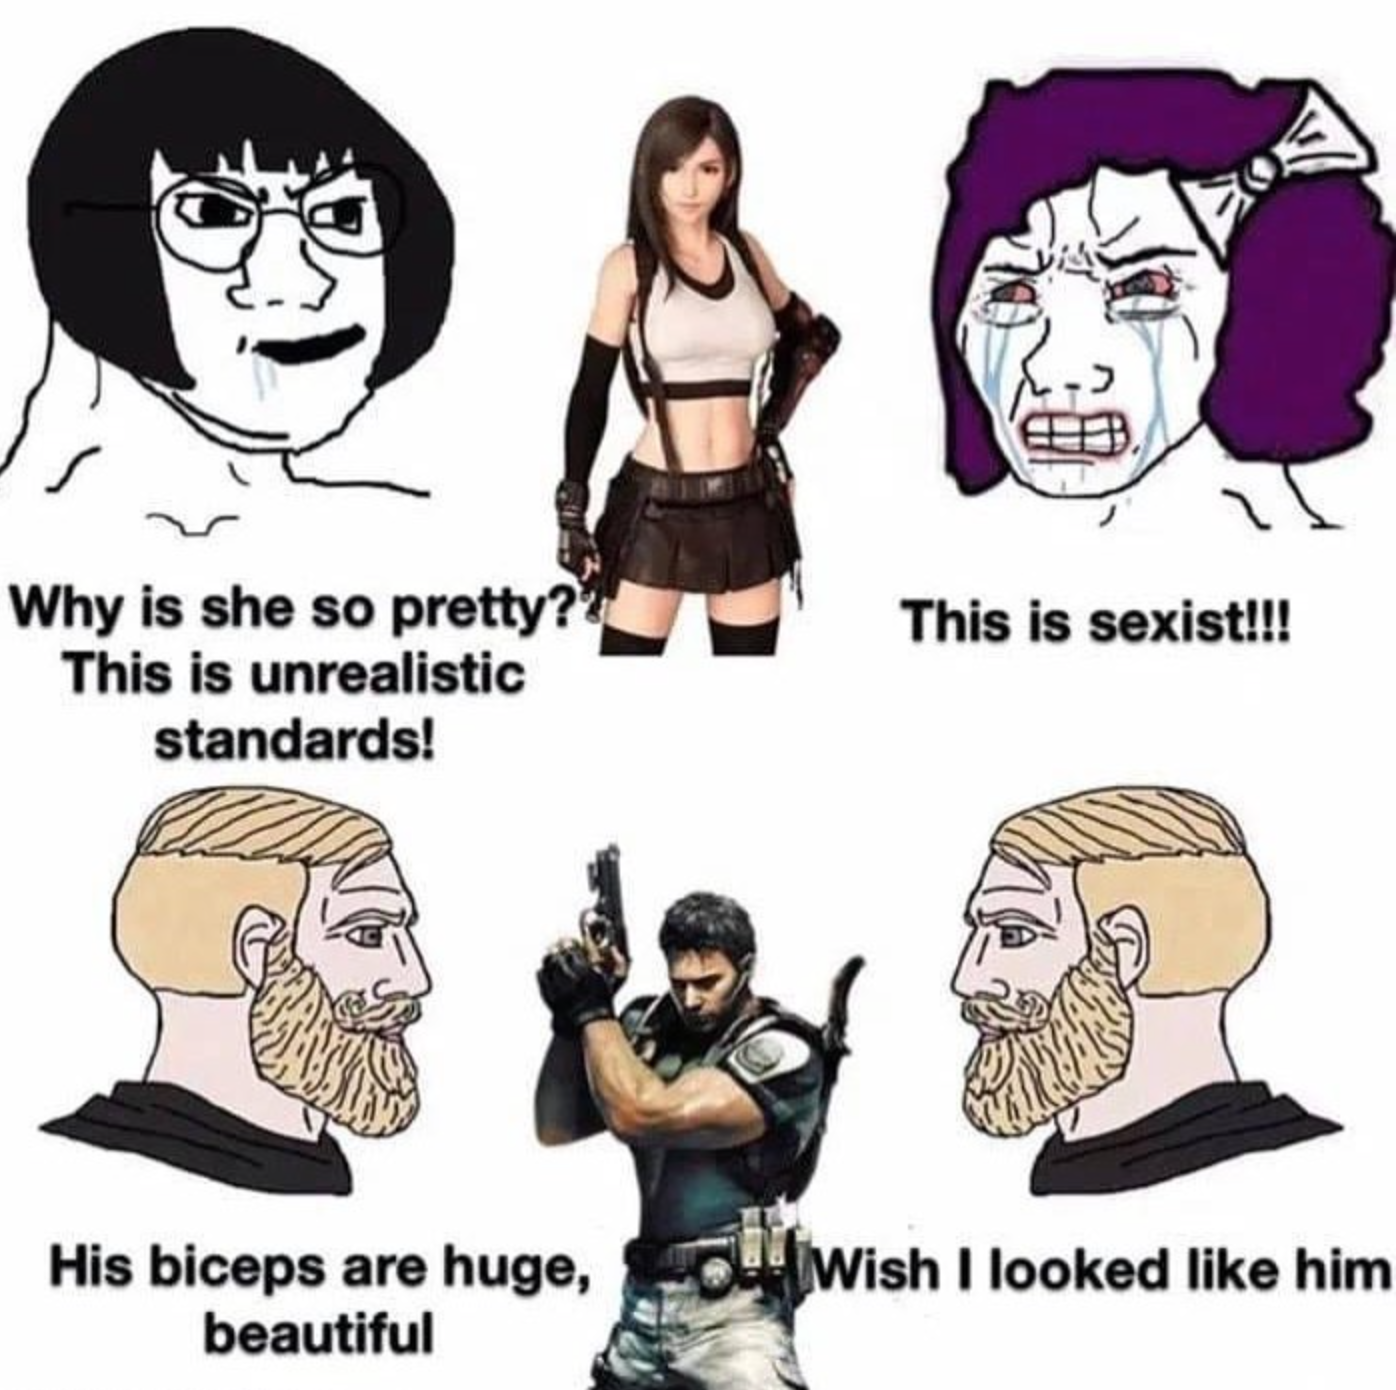 video game memes - weed smokers vs cigarette smokers meme - This is sexist!!! Why is she so pretty? This is unrealistic standards! I Wish I looked him His biceps are huge, beautiful